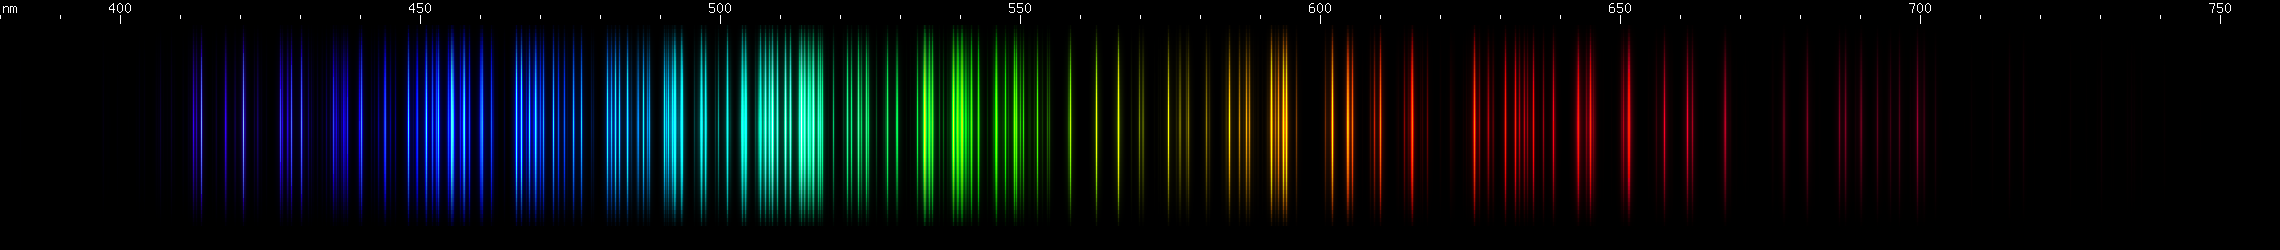 Spectral Lines of Tantalum